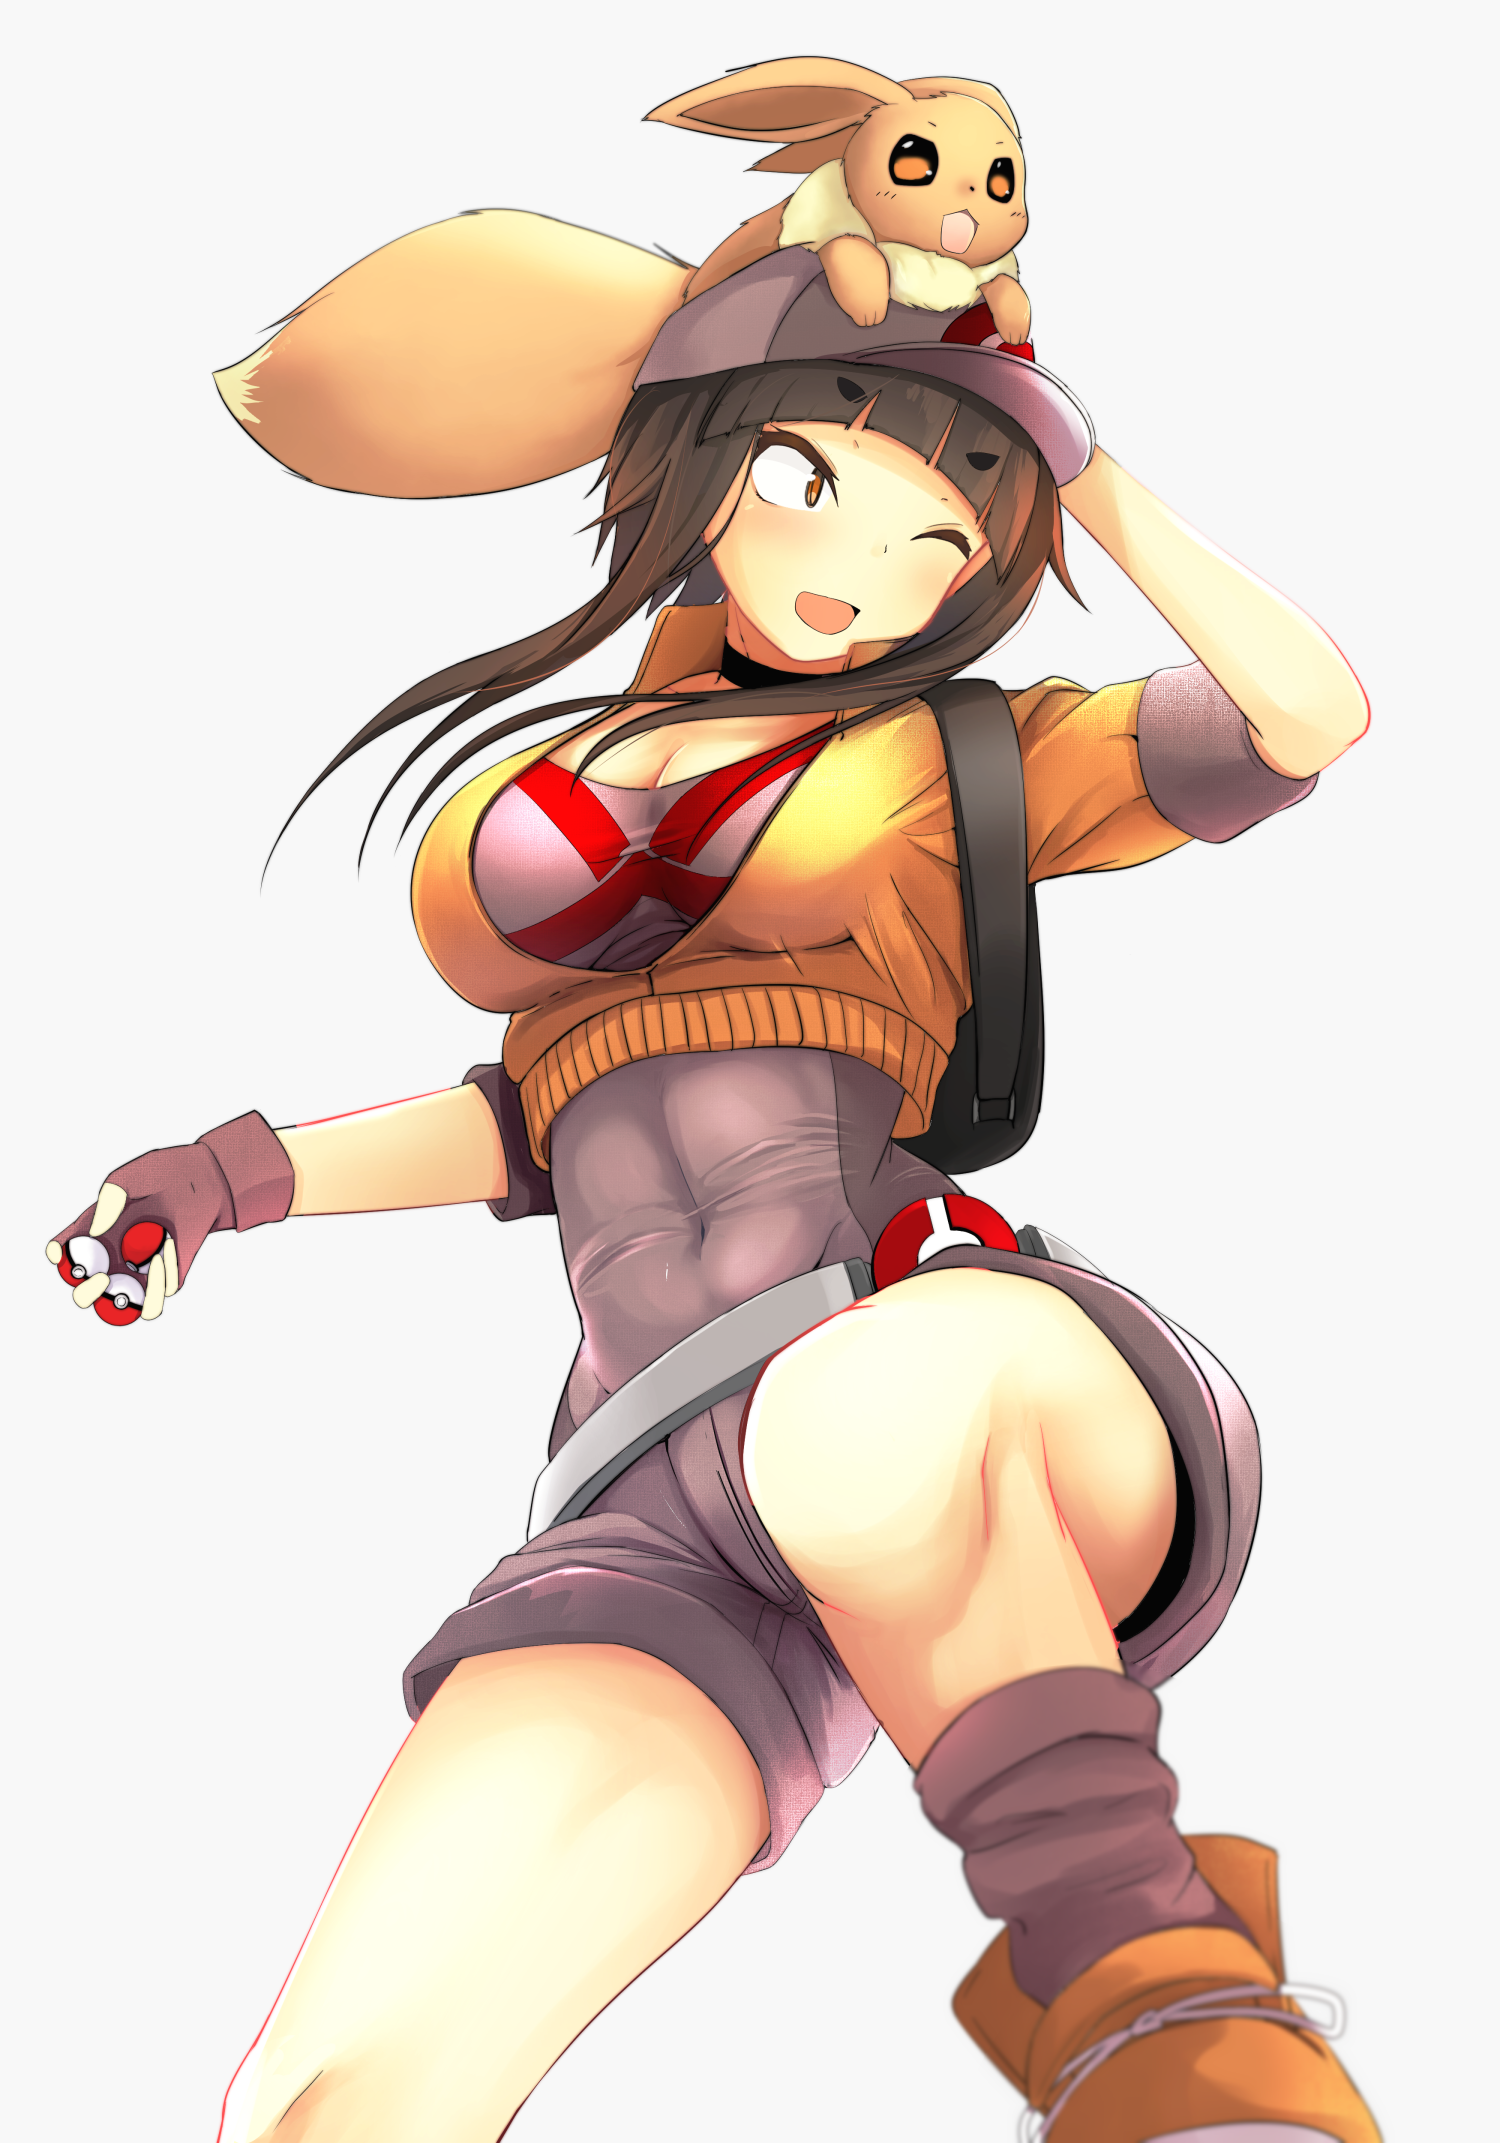 Anime 1500x2143 anime anime girls long hair open shirt Eevee Pokémon Pokemon Go Pokémon trainers crotch floss boobs white background simple background hat women with hats one eye closed